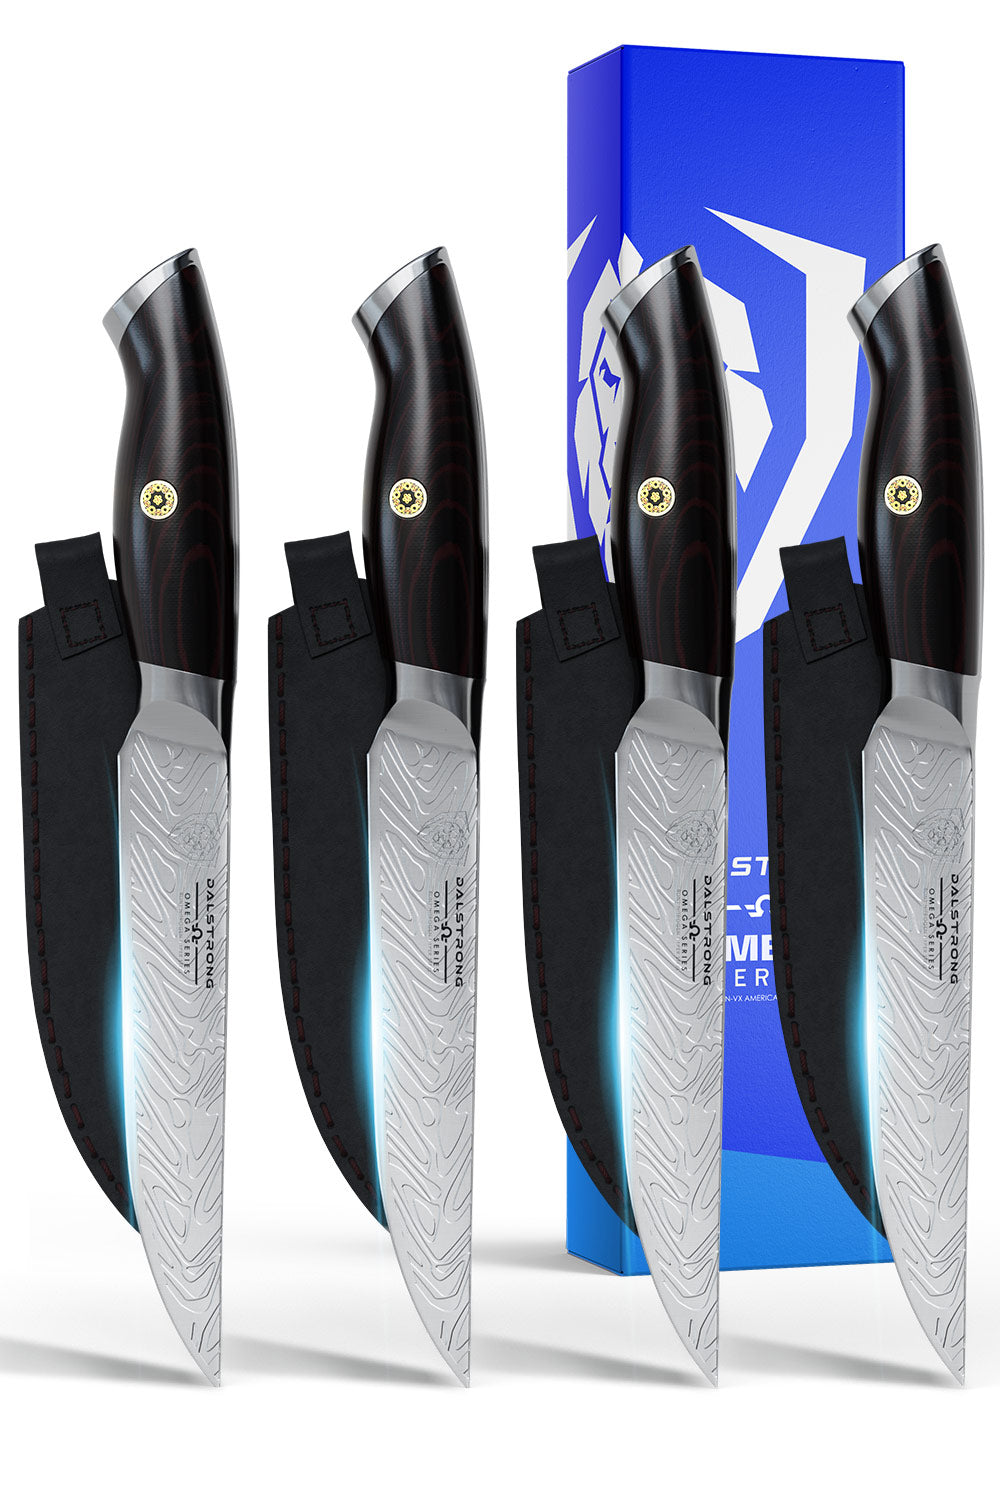  VALHALLA Hunting Knife Set, 4 Pieces Hunting Knives